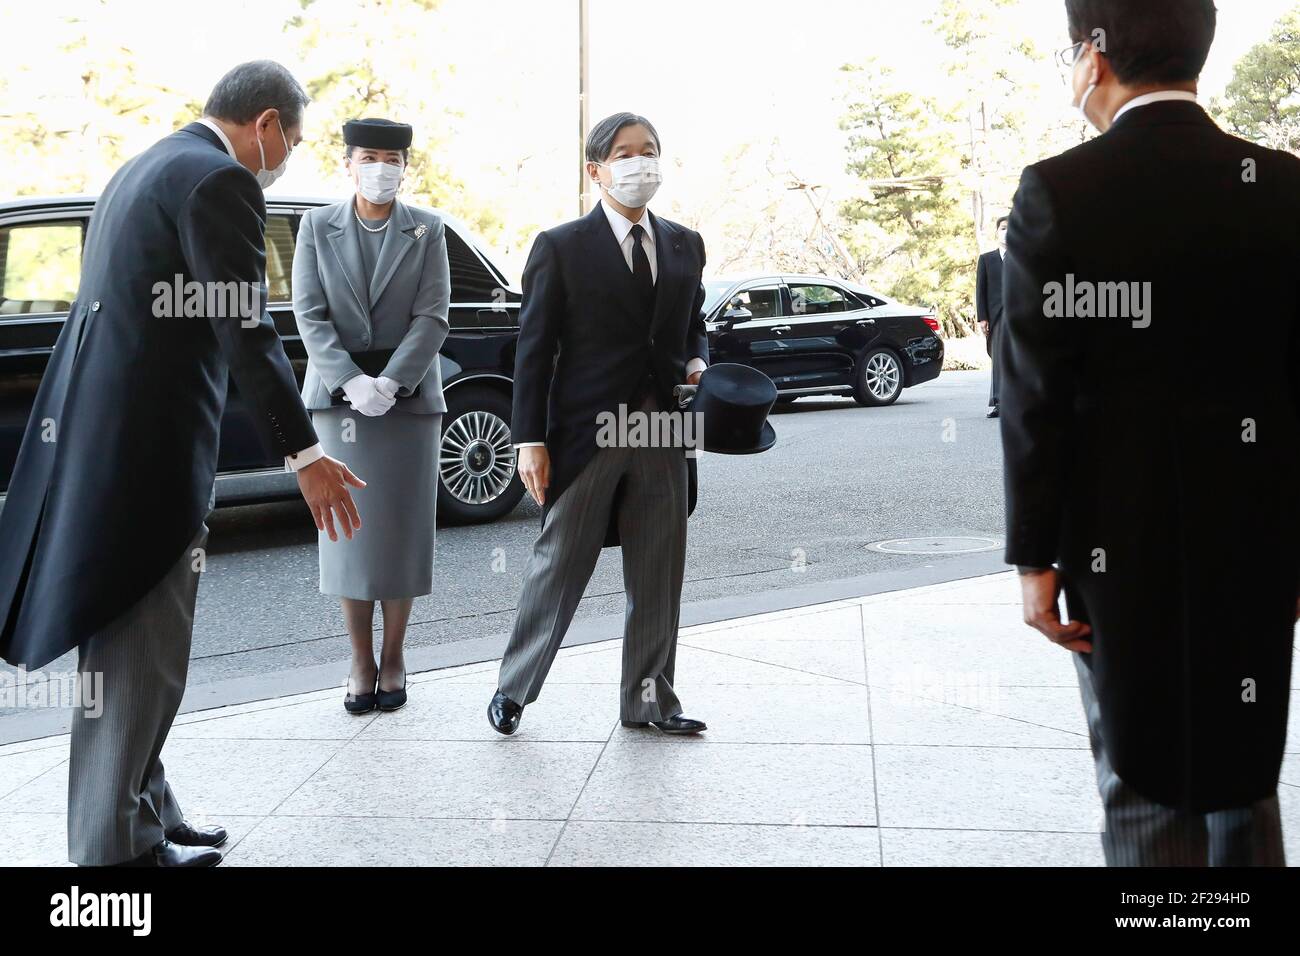 Tokyo, Japan. 11th Mar, 2021. Japanese Emperor Naruhito and Empress Masako wearing face masks arrive at the National Theatre of Japan to attend the national memorial service for the victims of the March 11 earthquake and tsunami. Japan marked the 10th anniversary of the Great East Japan Earthquake, Tsunami and Nuclear Disaster. This year the Japanese government held its national memorial ceremony for the victims despite to the coronavirus pandemic in the country. Credit: Rodrigo Reyes Marin/ZUMA Wire/Alamy Live News Stock Photo